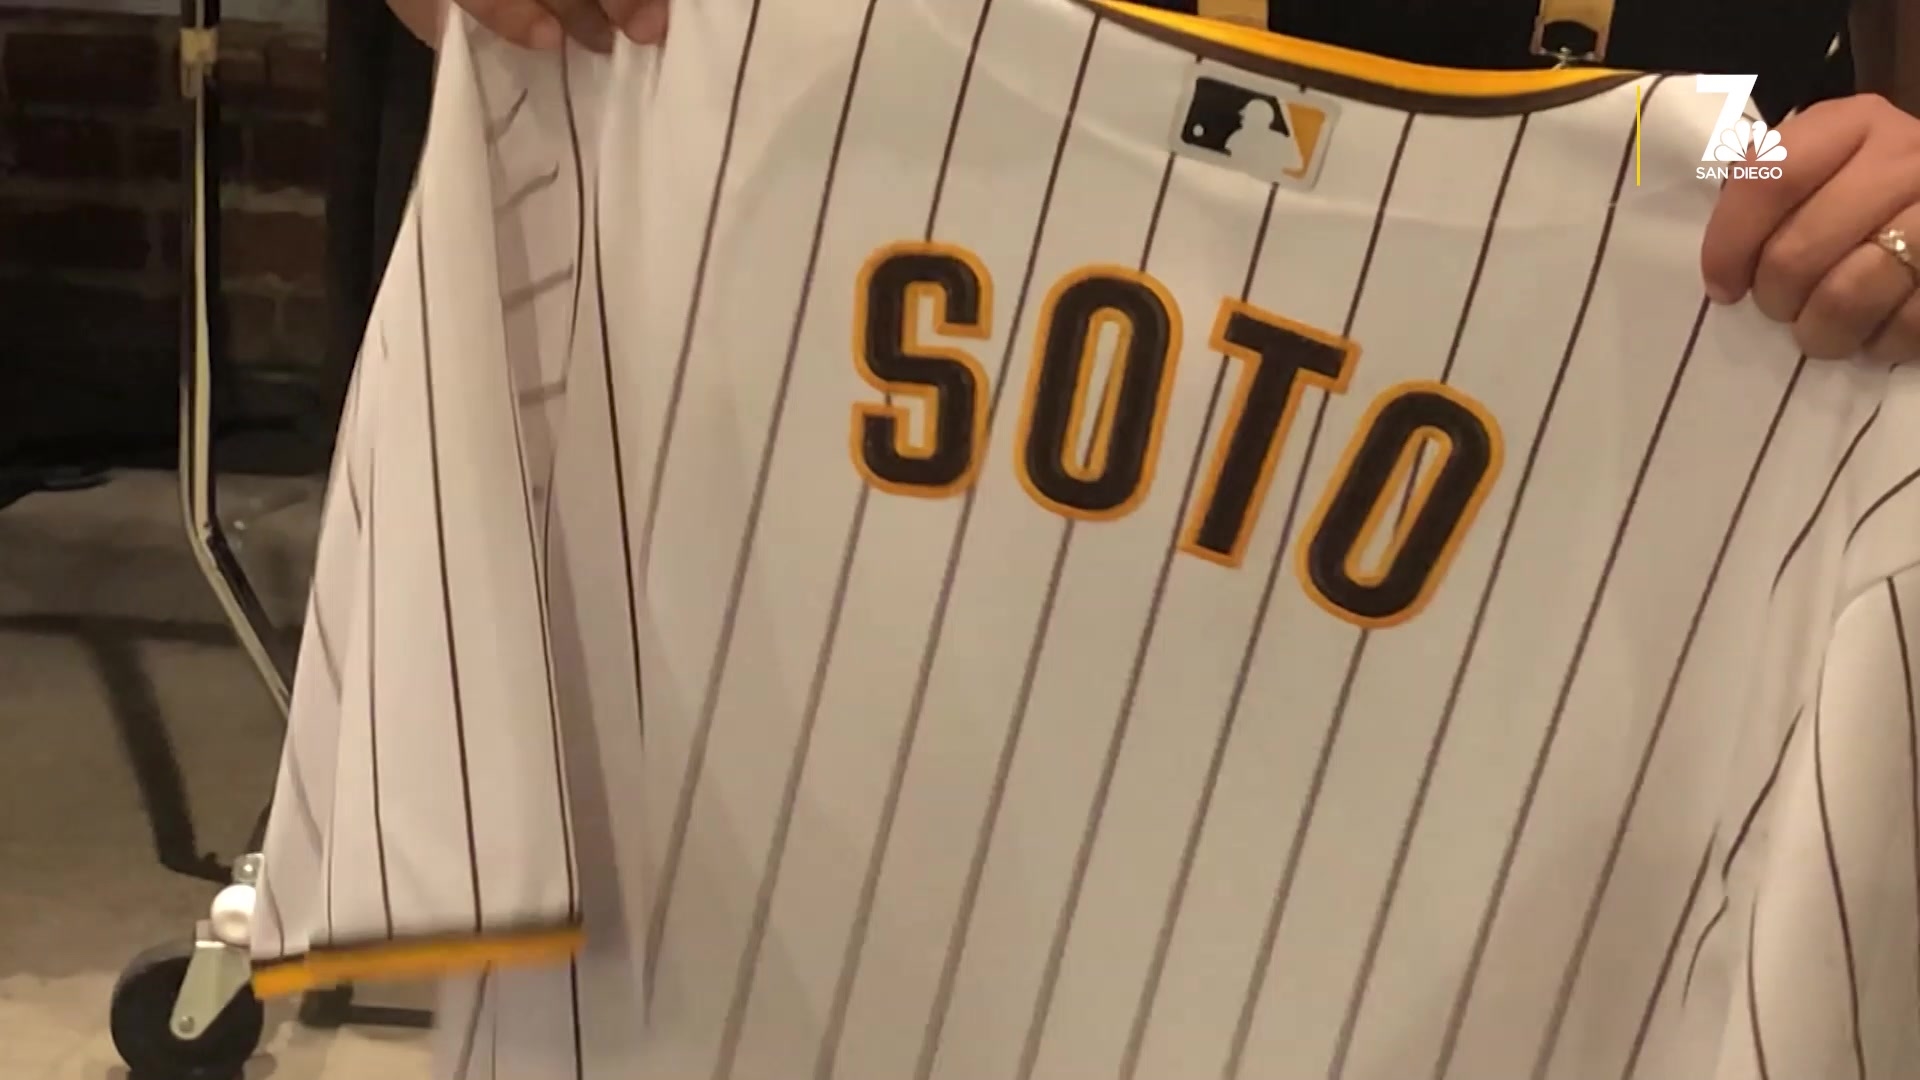 He's a Padre Now: Watch Juan Soto Jerseys Get Printed – NBC 7 San Diego